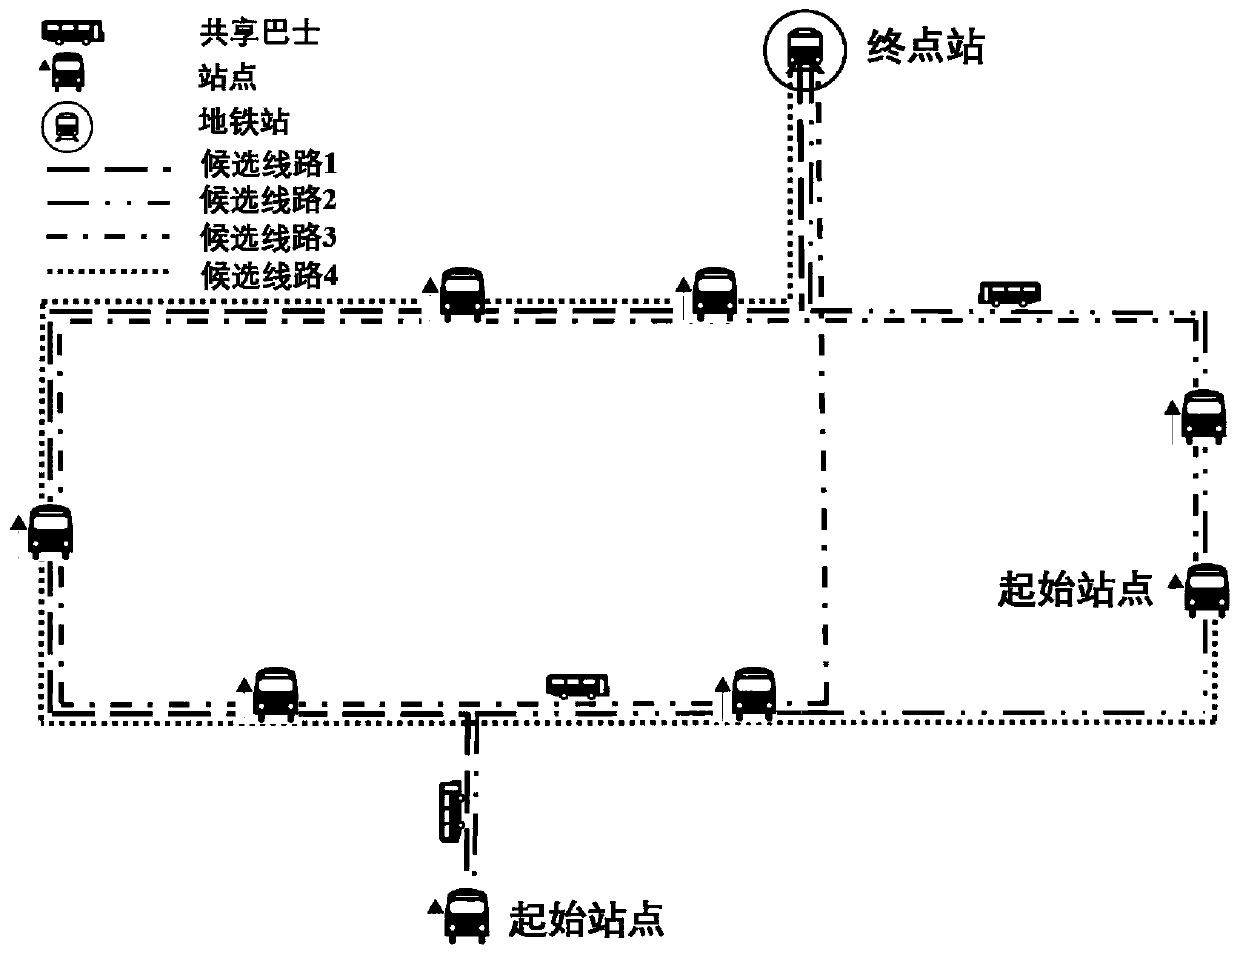 Dynamic vehicle scheduling and route planning method for shared bus